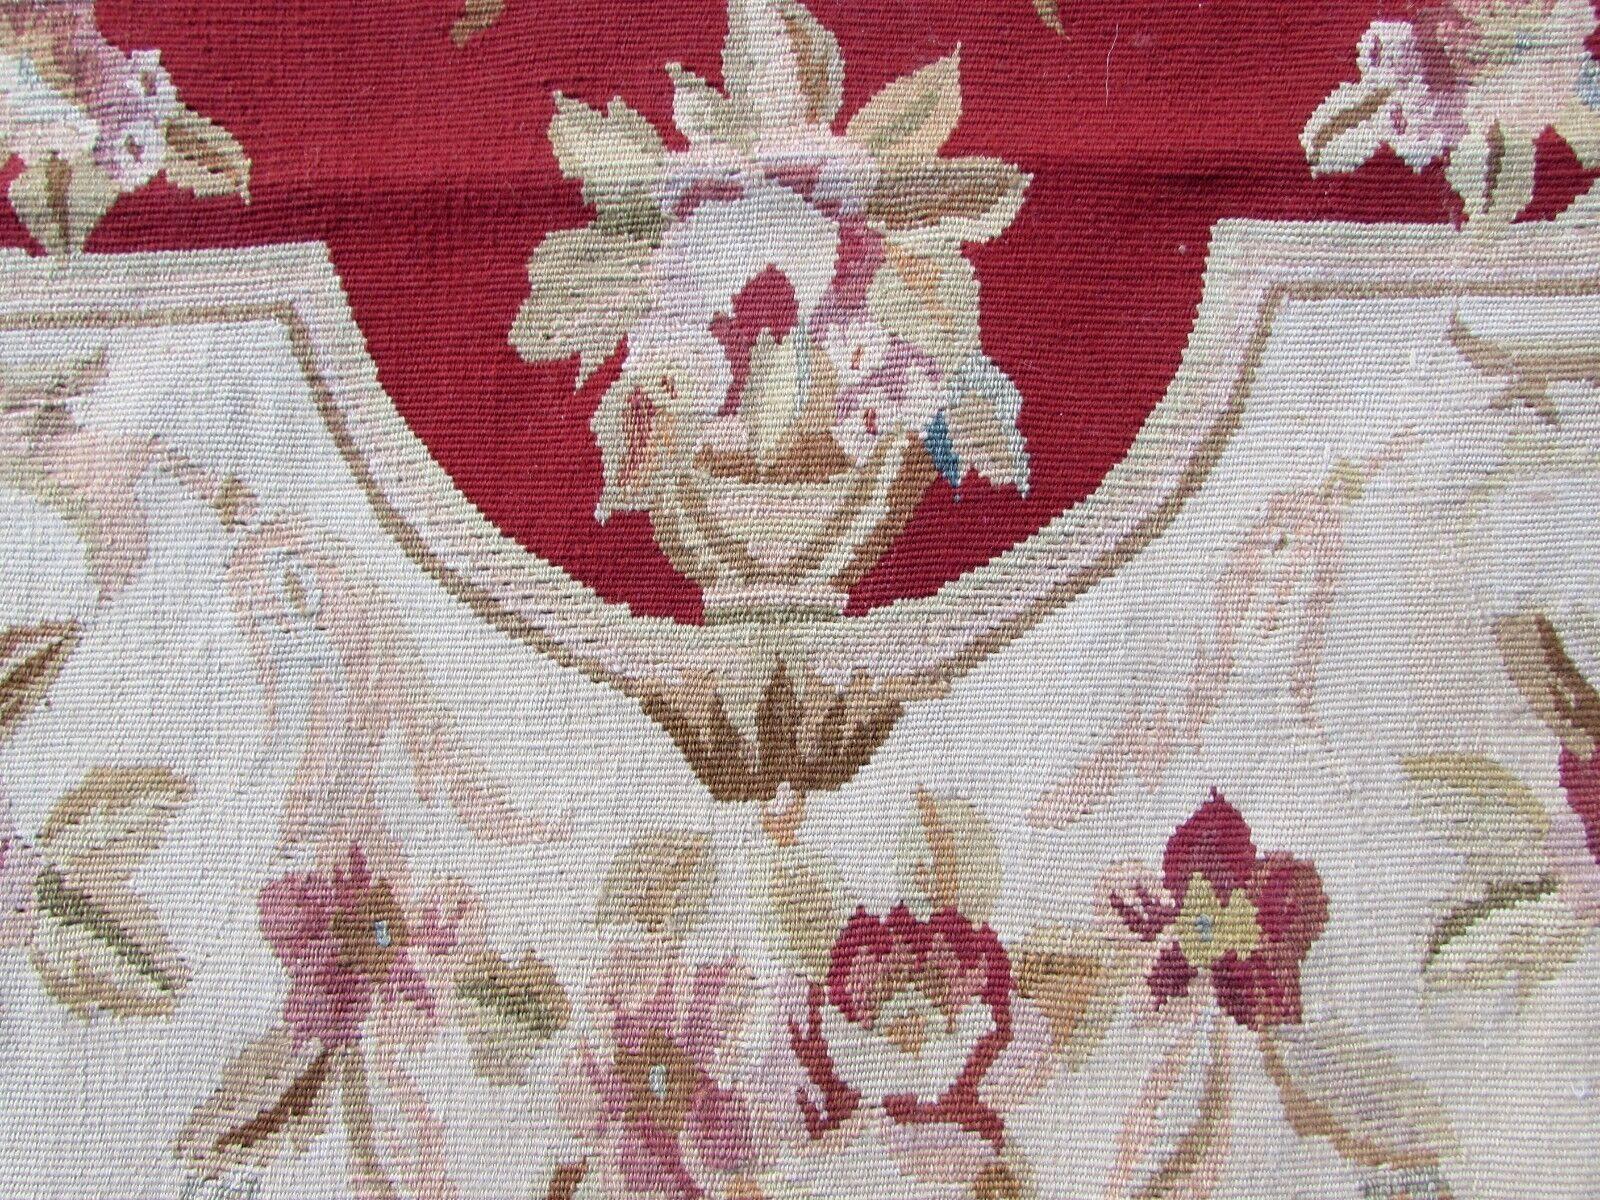 Handmade Vintage French Aubusson Rug 2.6' x 4.7', 1980s, 1Q38 For Sale 4